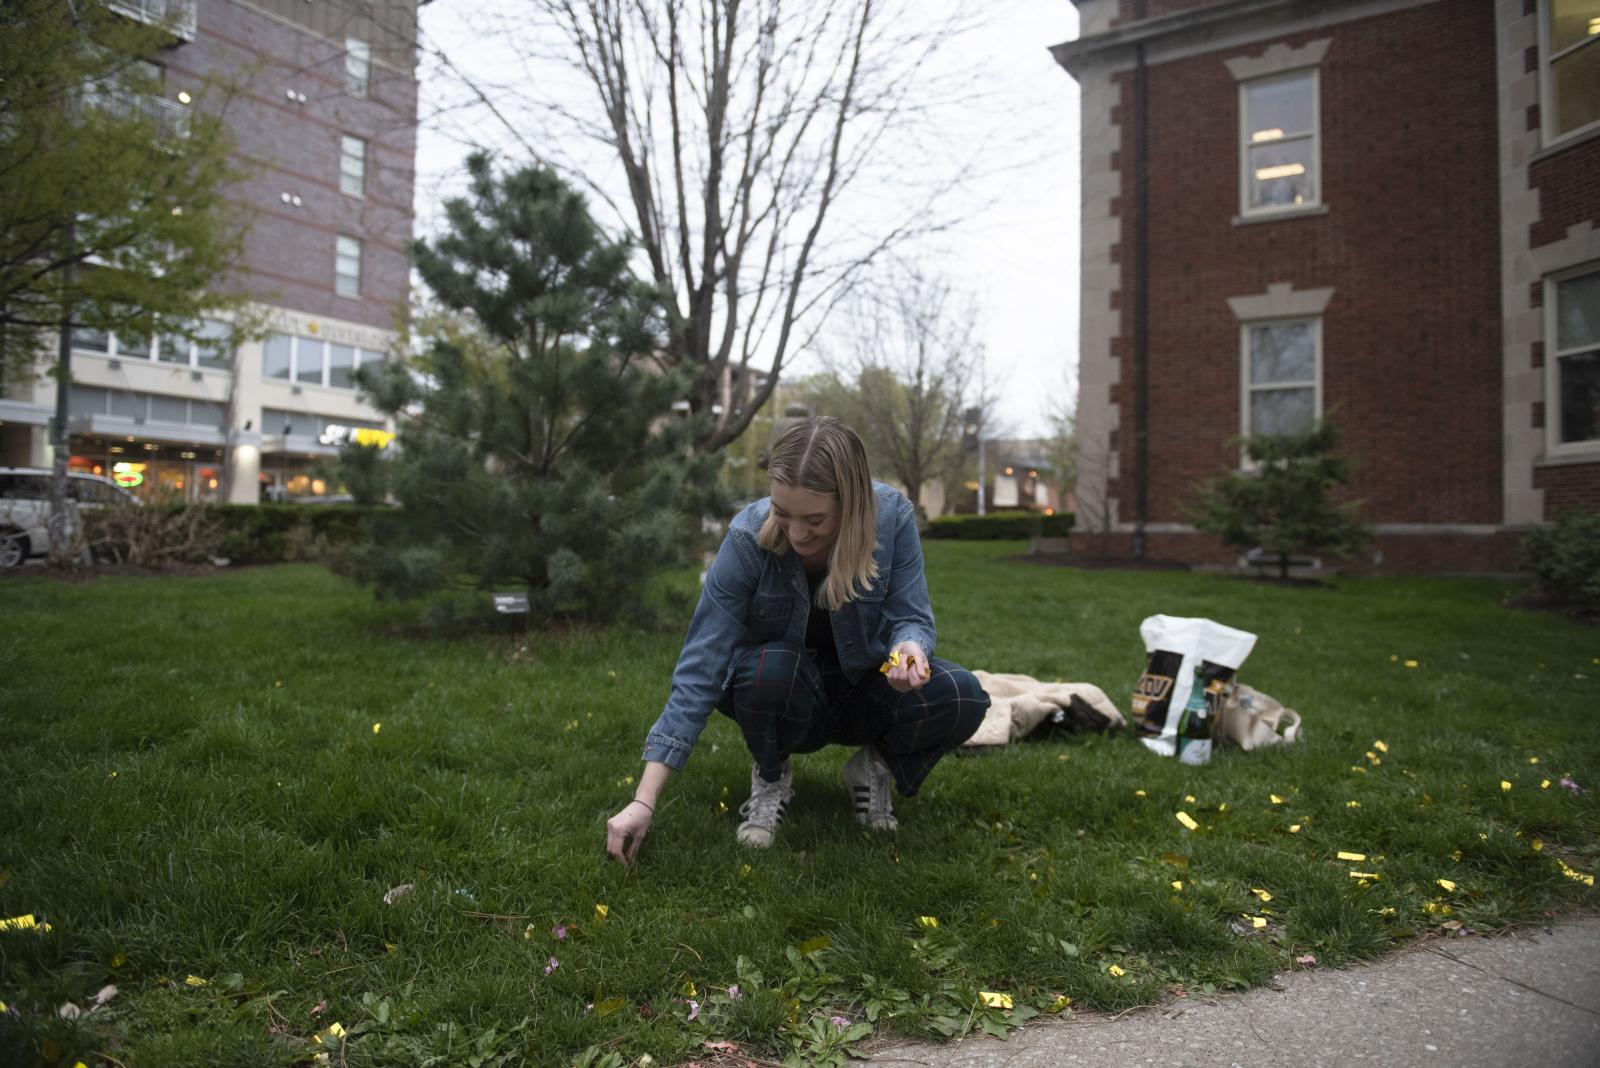 Kaleigh picks up discarded confetti to reuse for senior portraits April 19, 2022, at the University of Missouri in Columbia, Mo. Columbia 